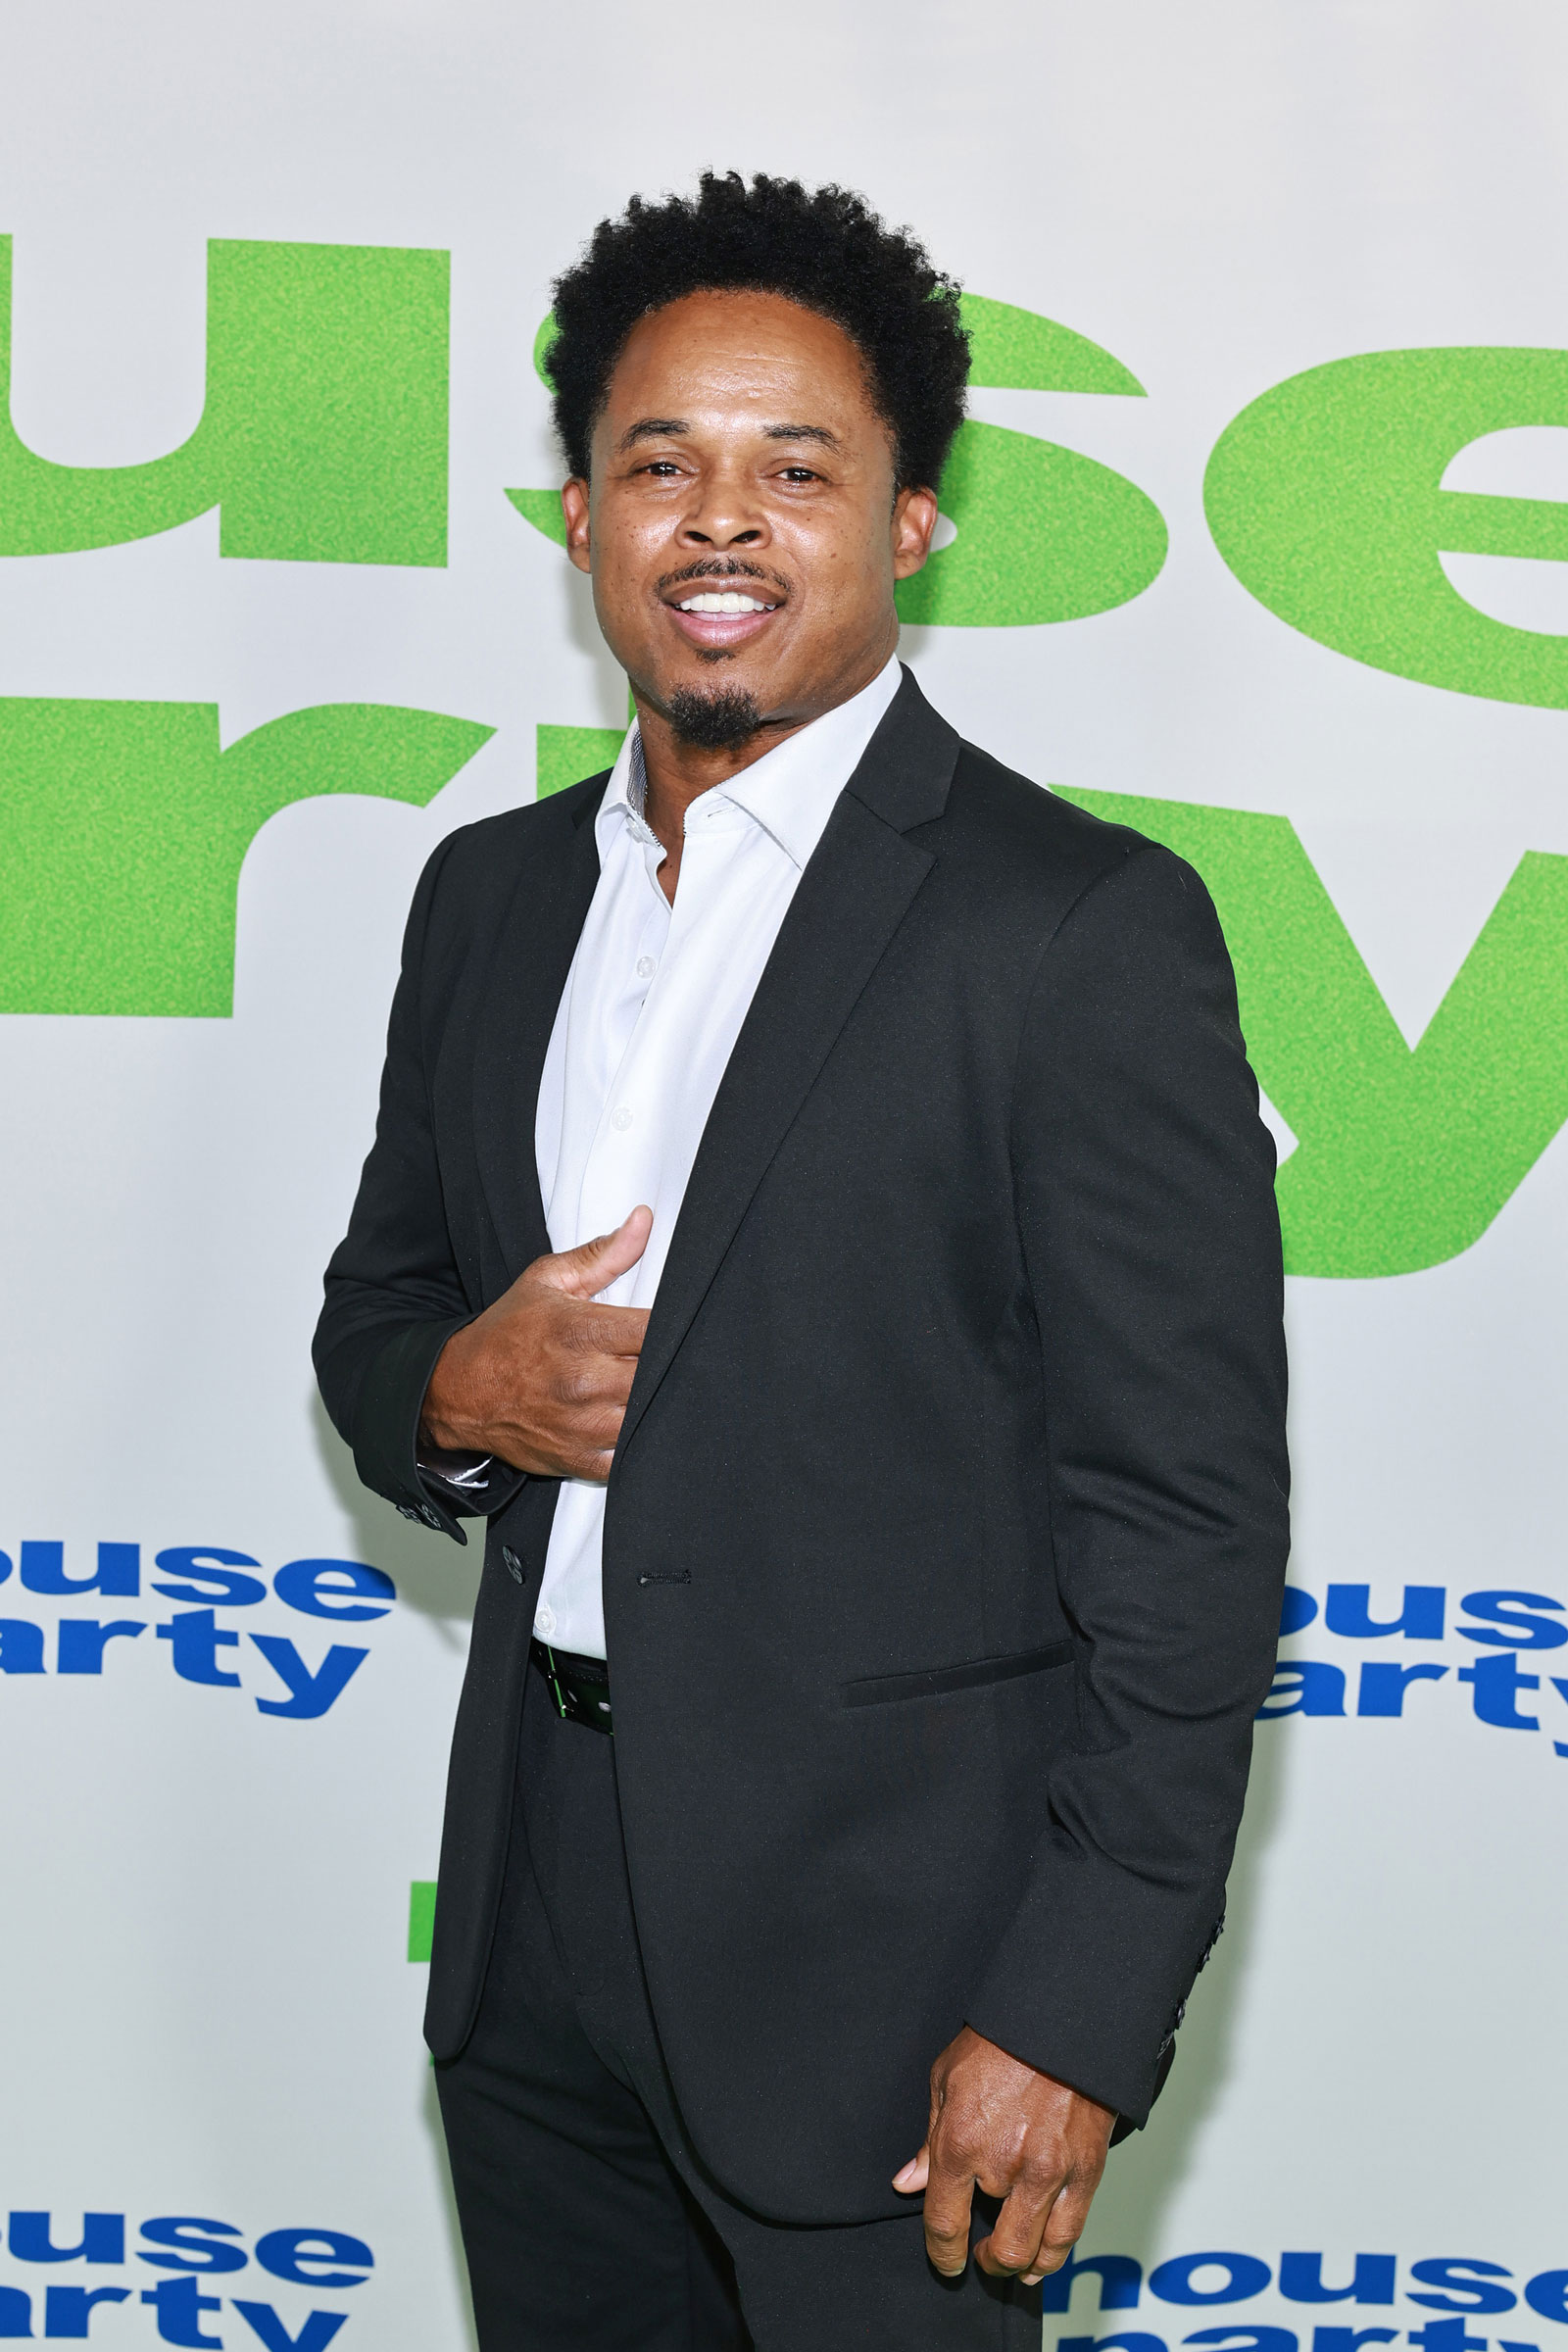 Walter Emanuel Jones attends the Special Red Carpet Screening for New Line Cinema’s “House Party” at TCL Chinese 6 Theatres in Hollywood, Calif., on Jan. 11, 2023.